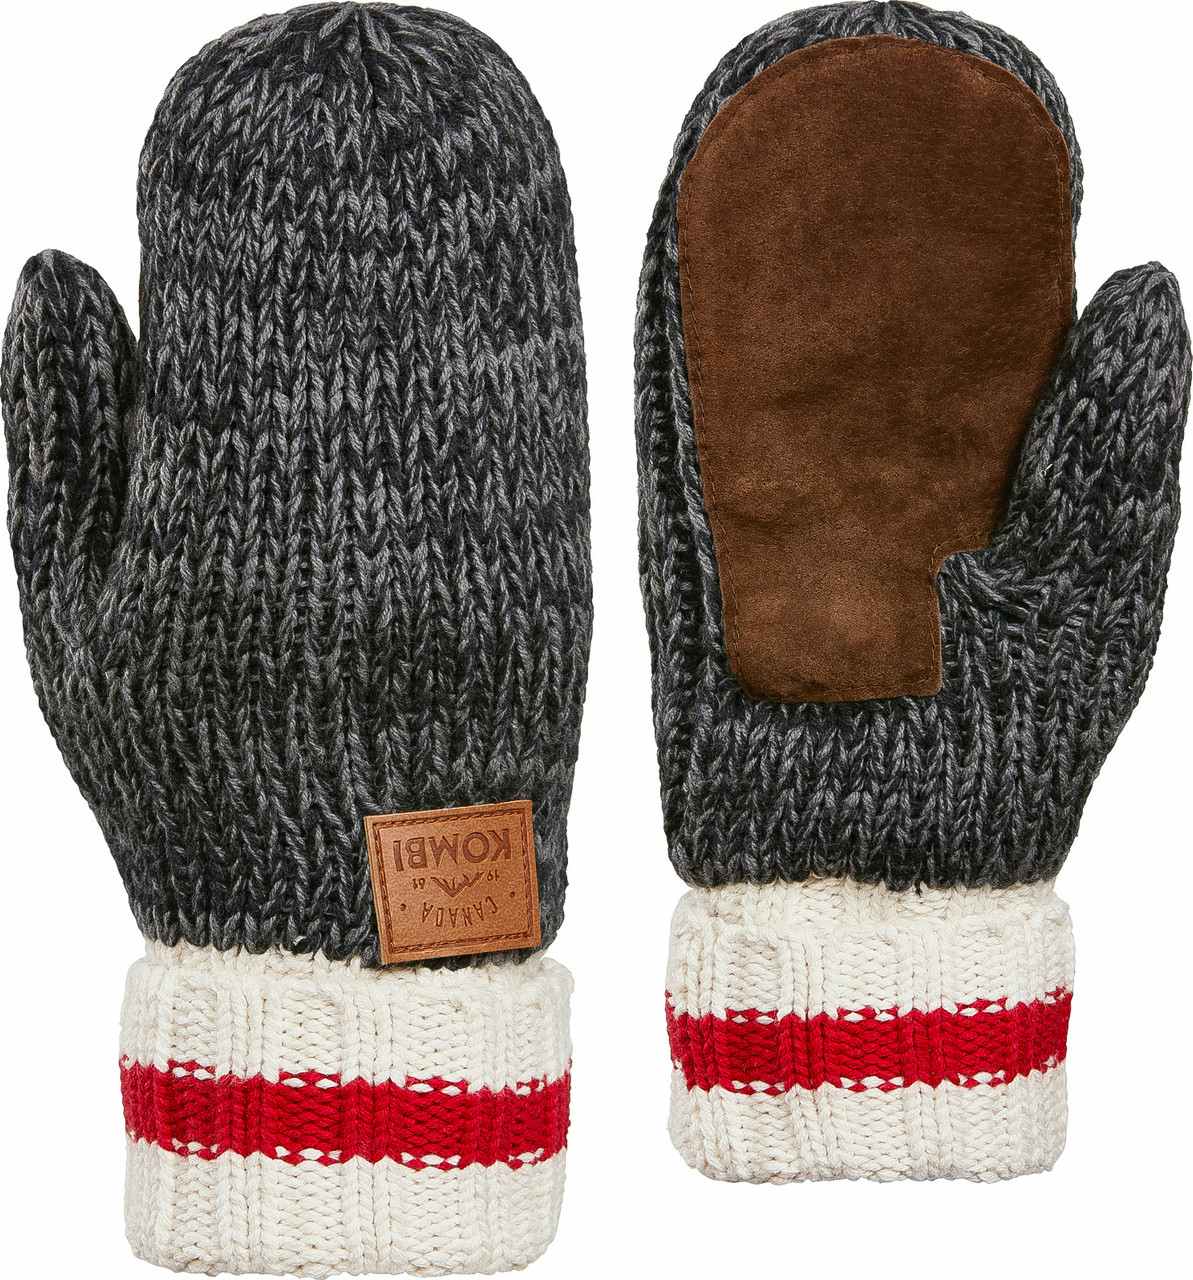 The Camp Mitts Black